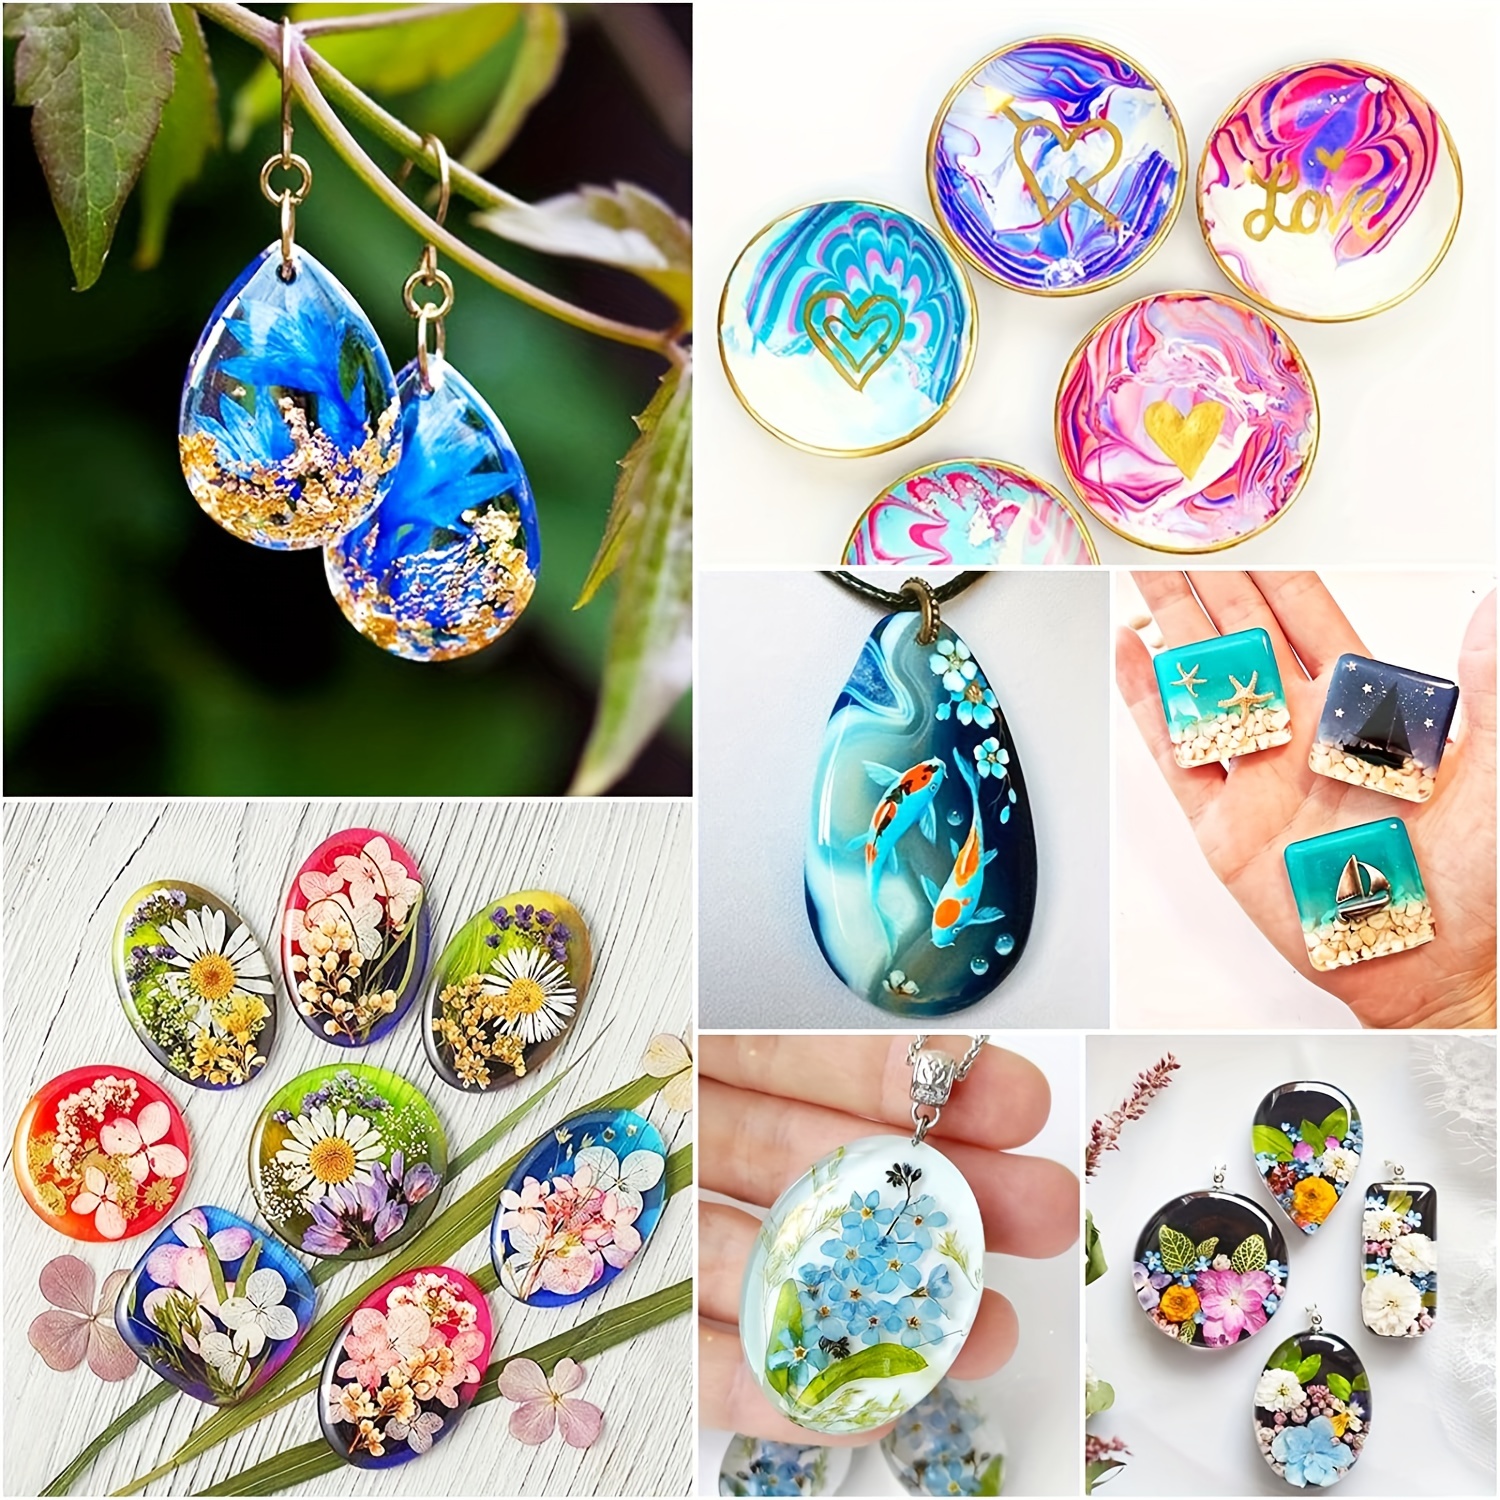 Resin Jewelry Molds, Silicone Molds For Diy Jewelry Pendant